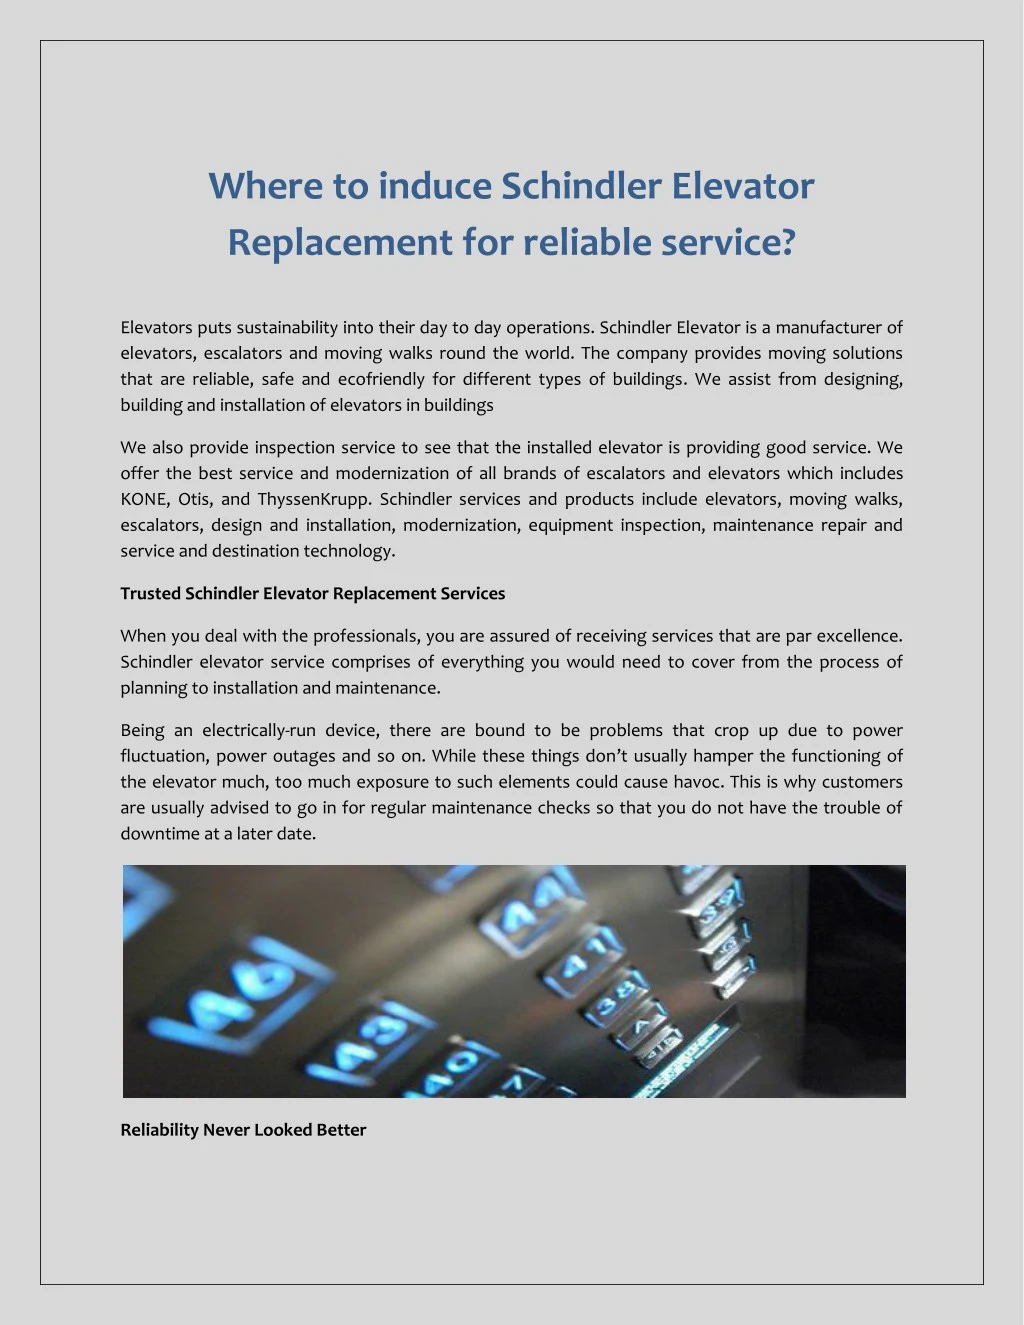 where to induce schindler elevator replacement